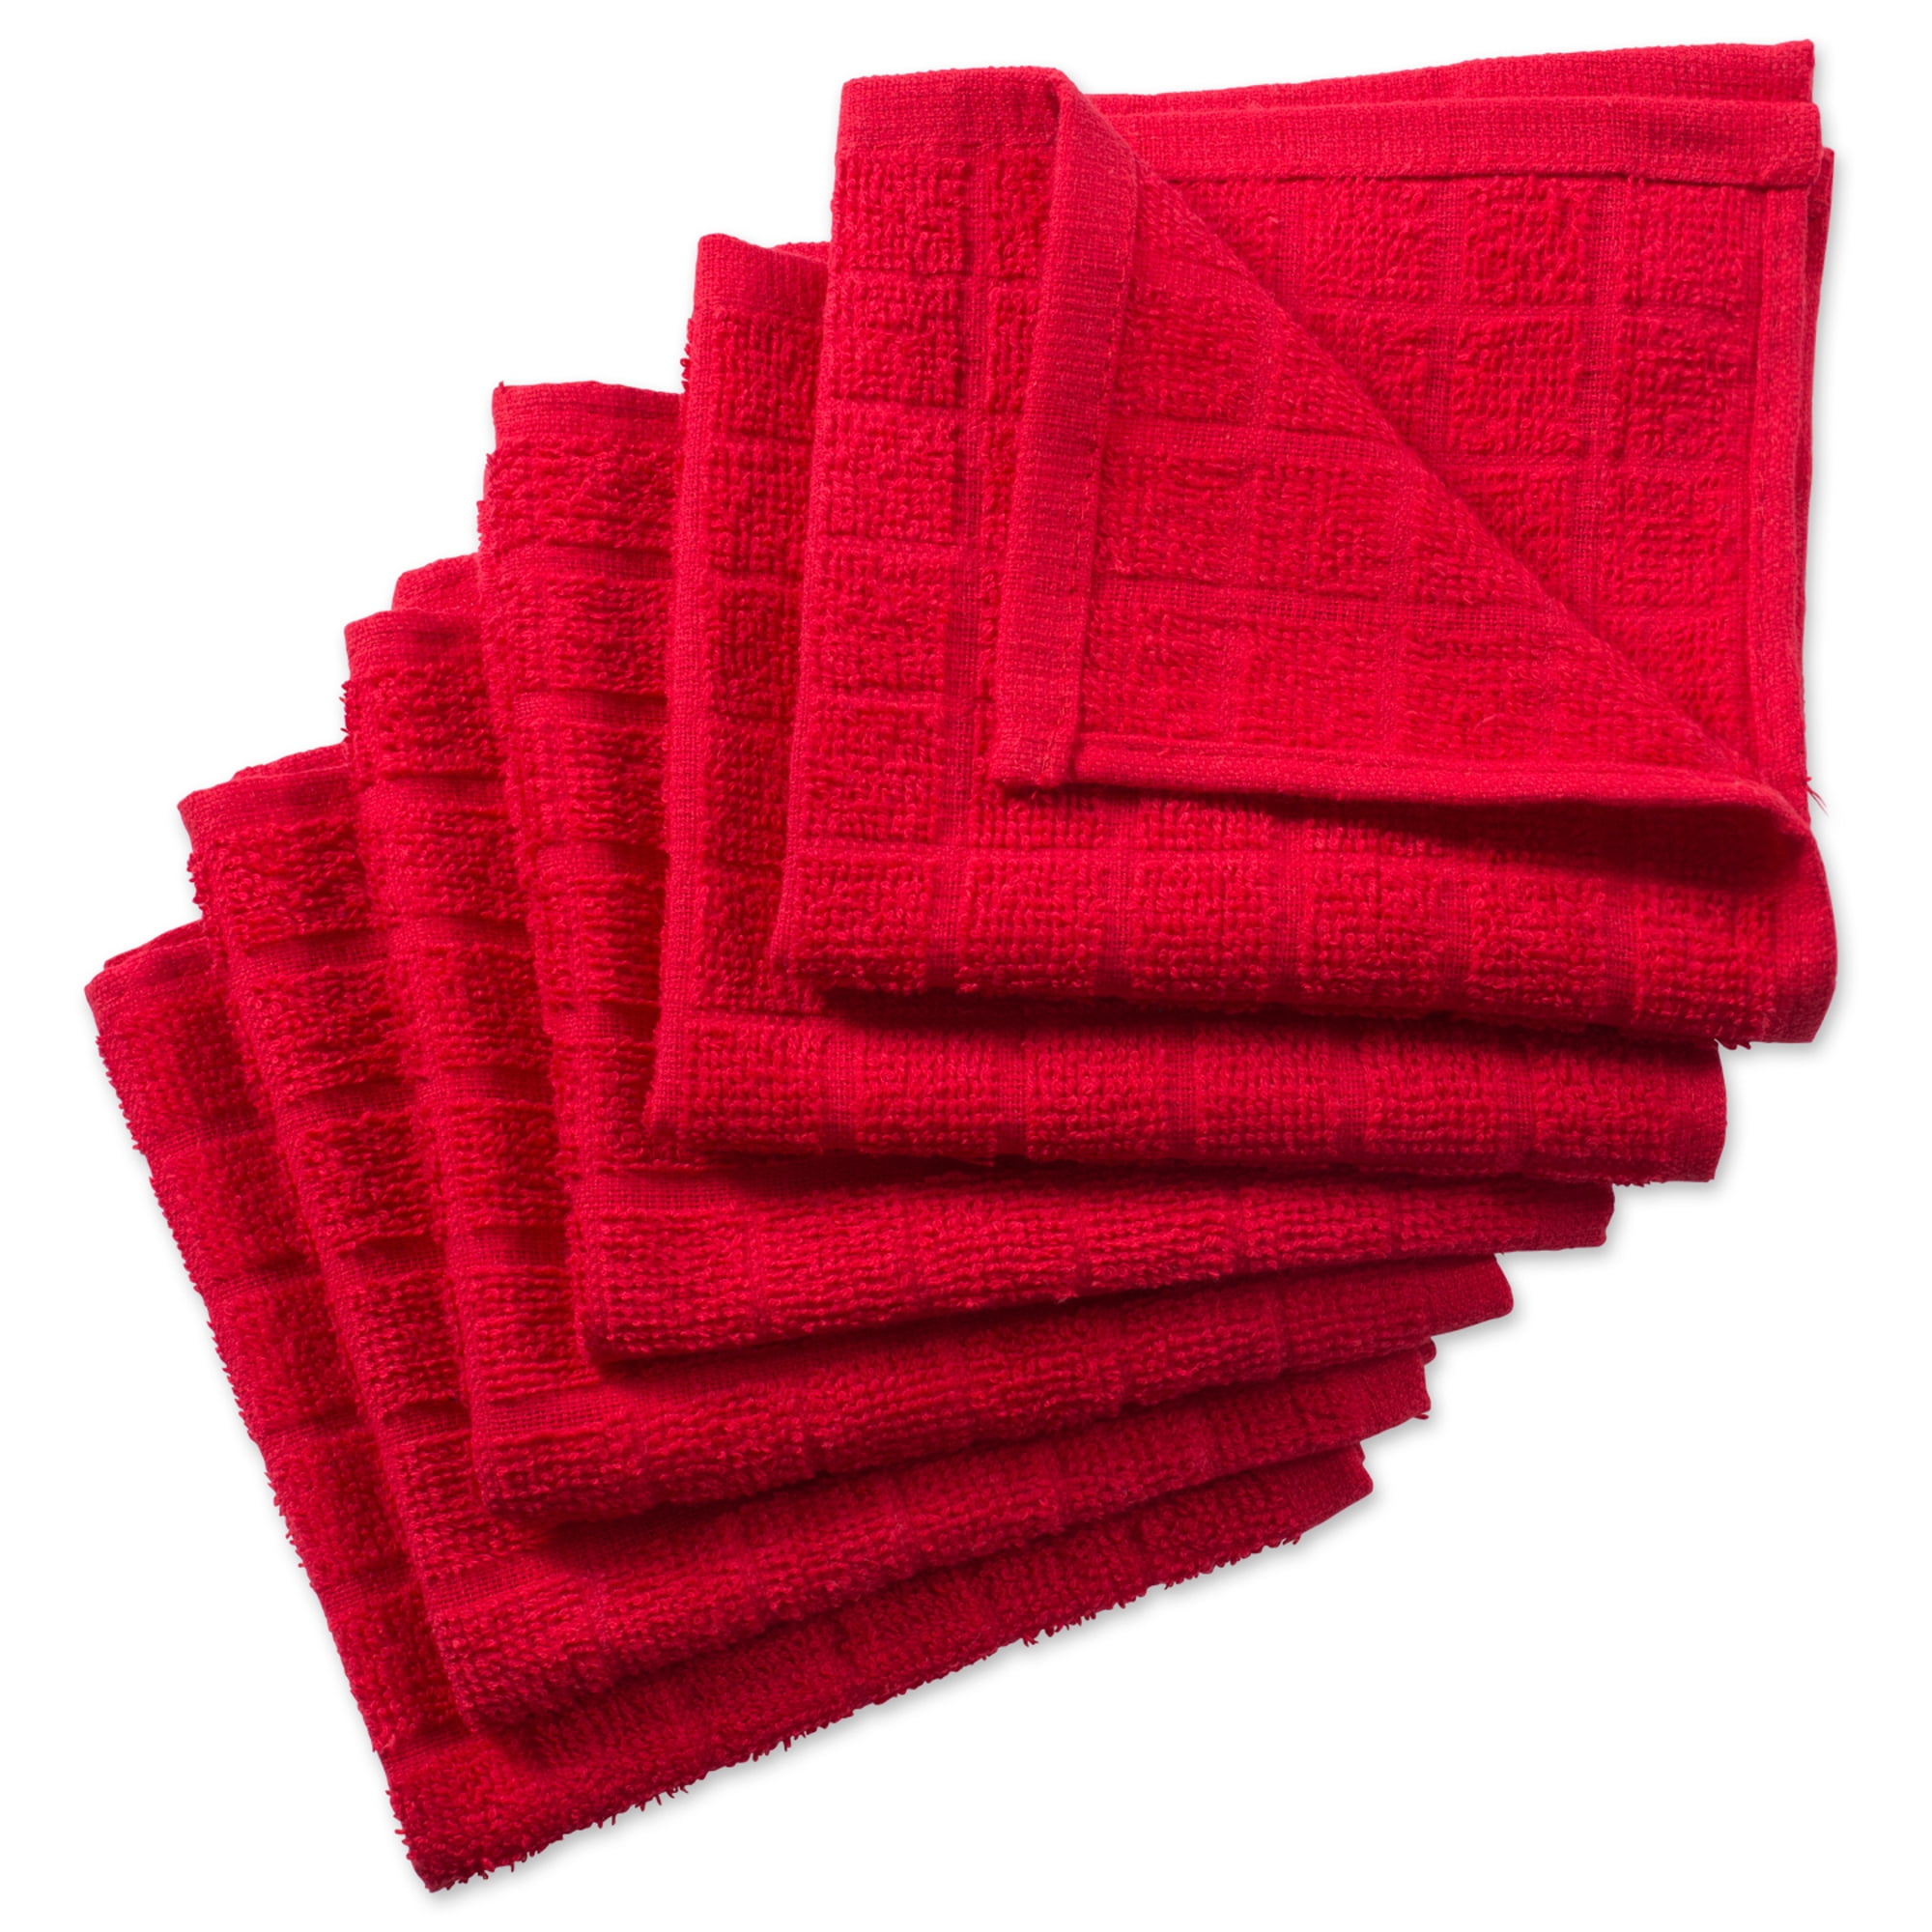 Packs of 2 4 6 12 Tea Towels 100% Cotton Terry Kitchen Dish Drying Towel Sets 